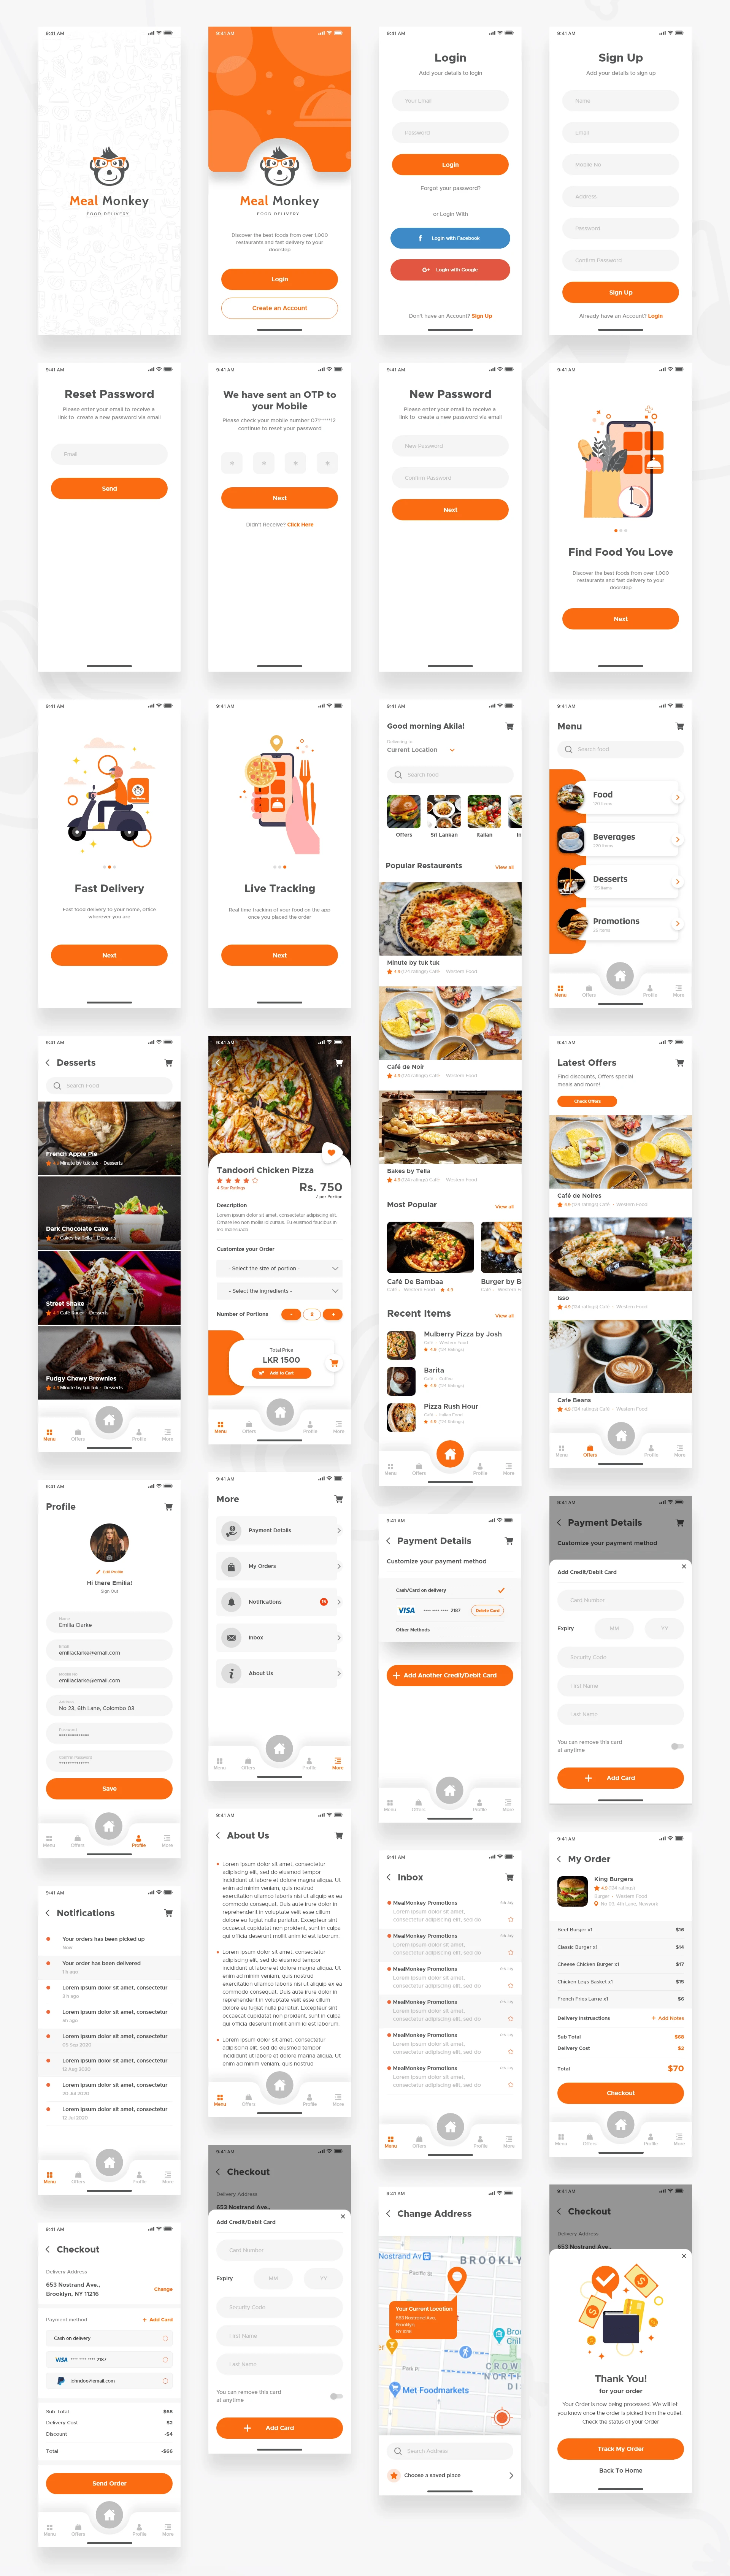 Food Delivery Free UI Kit for Adobe XD - Designed with the simplicity of mind. Meal Monkey app enables the user experience of a well planned UI/UX.